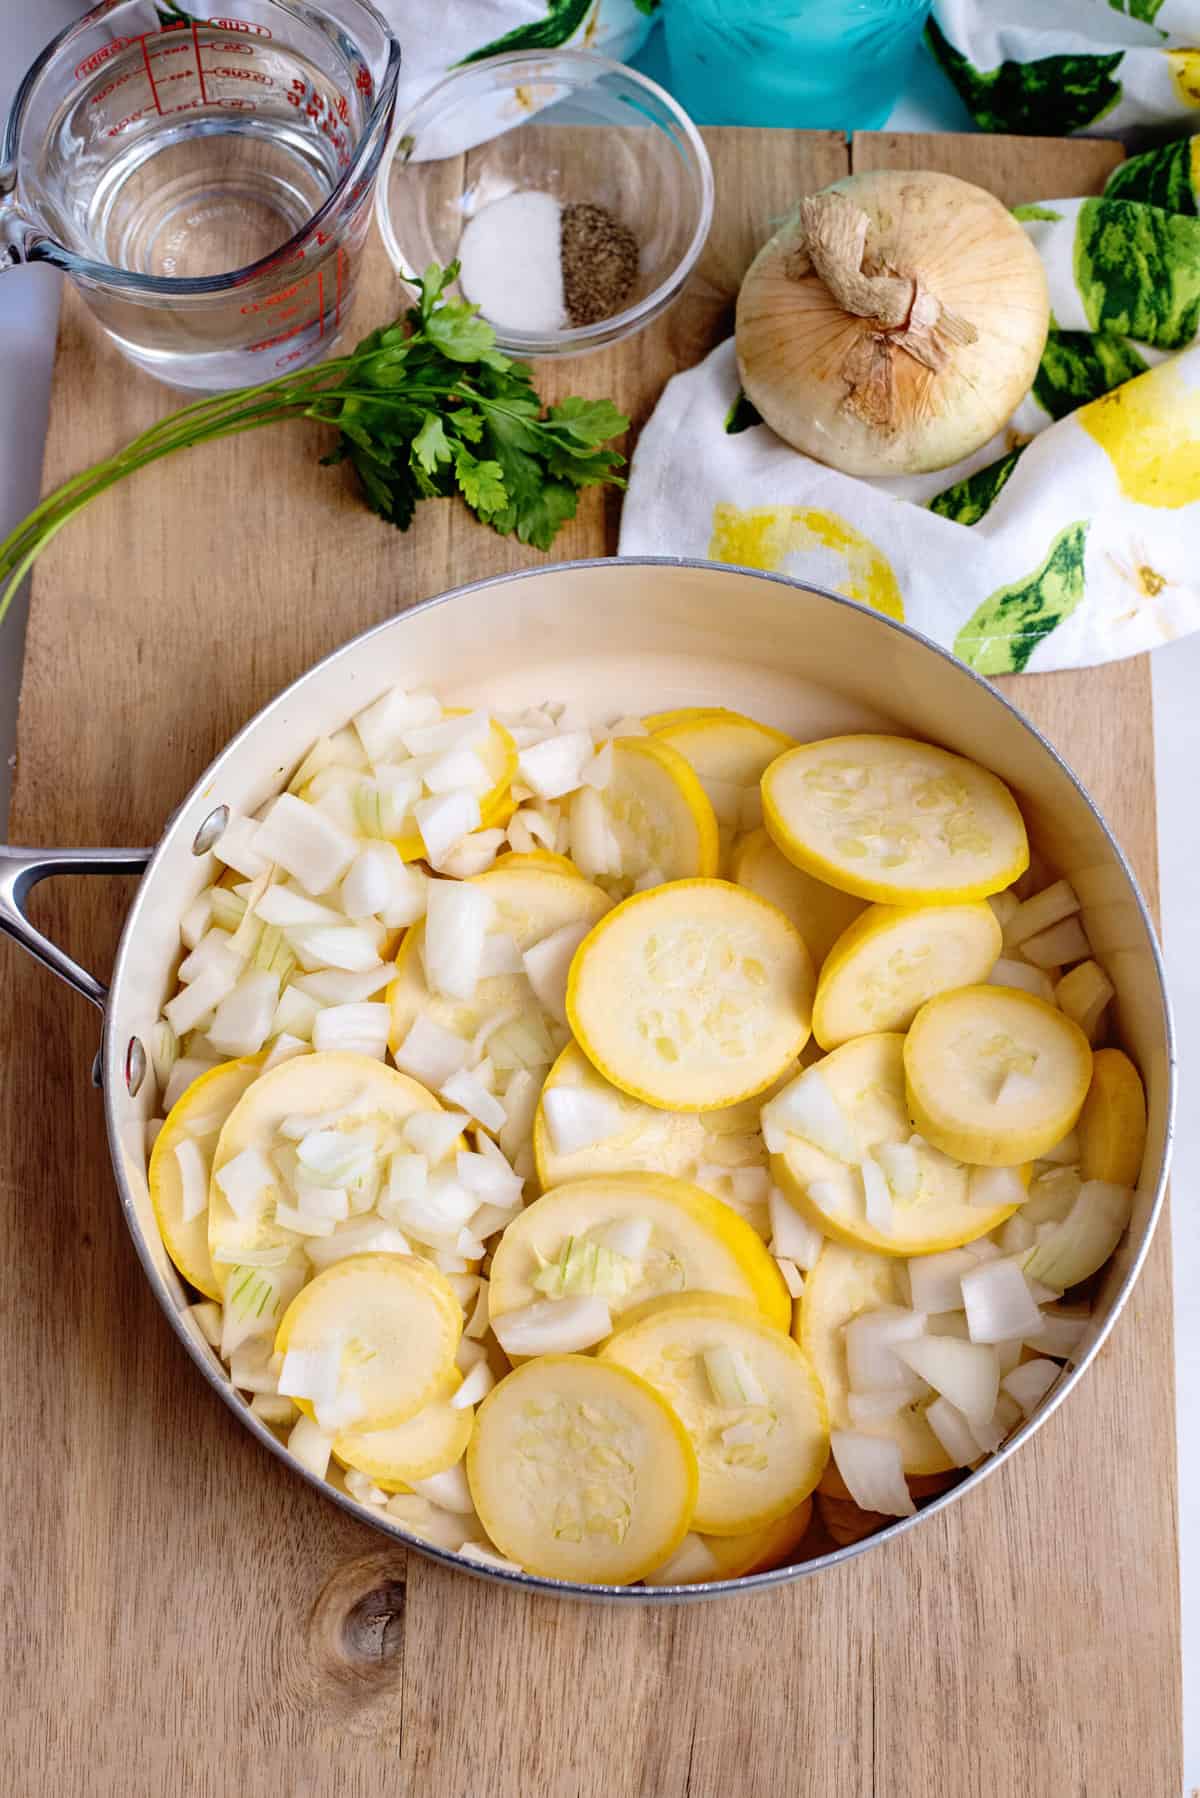 Place onion and squash in skillet.